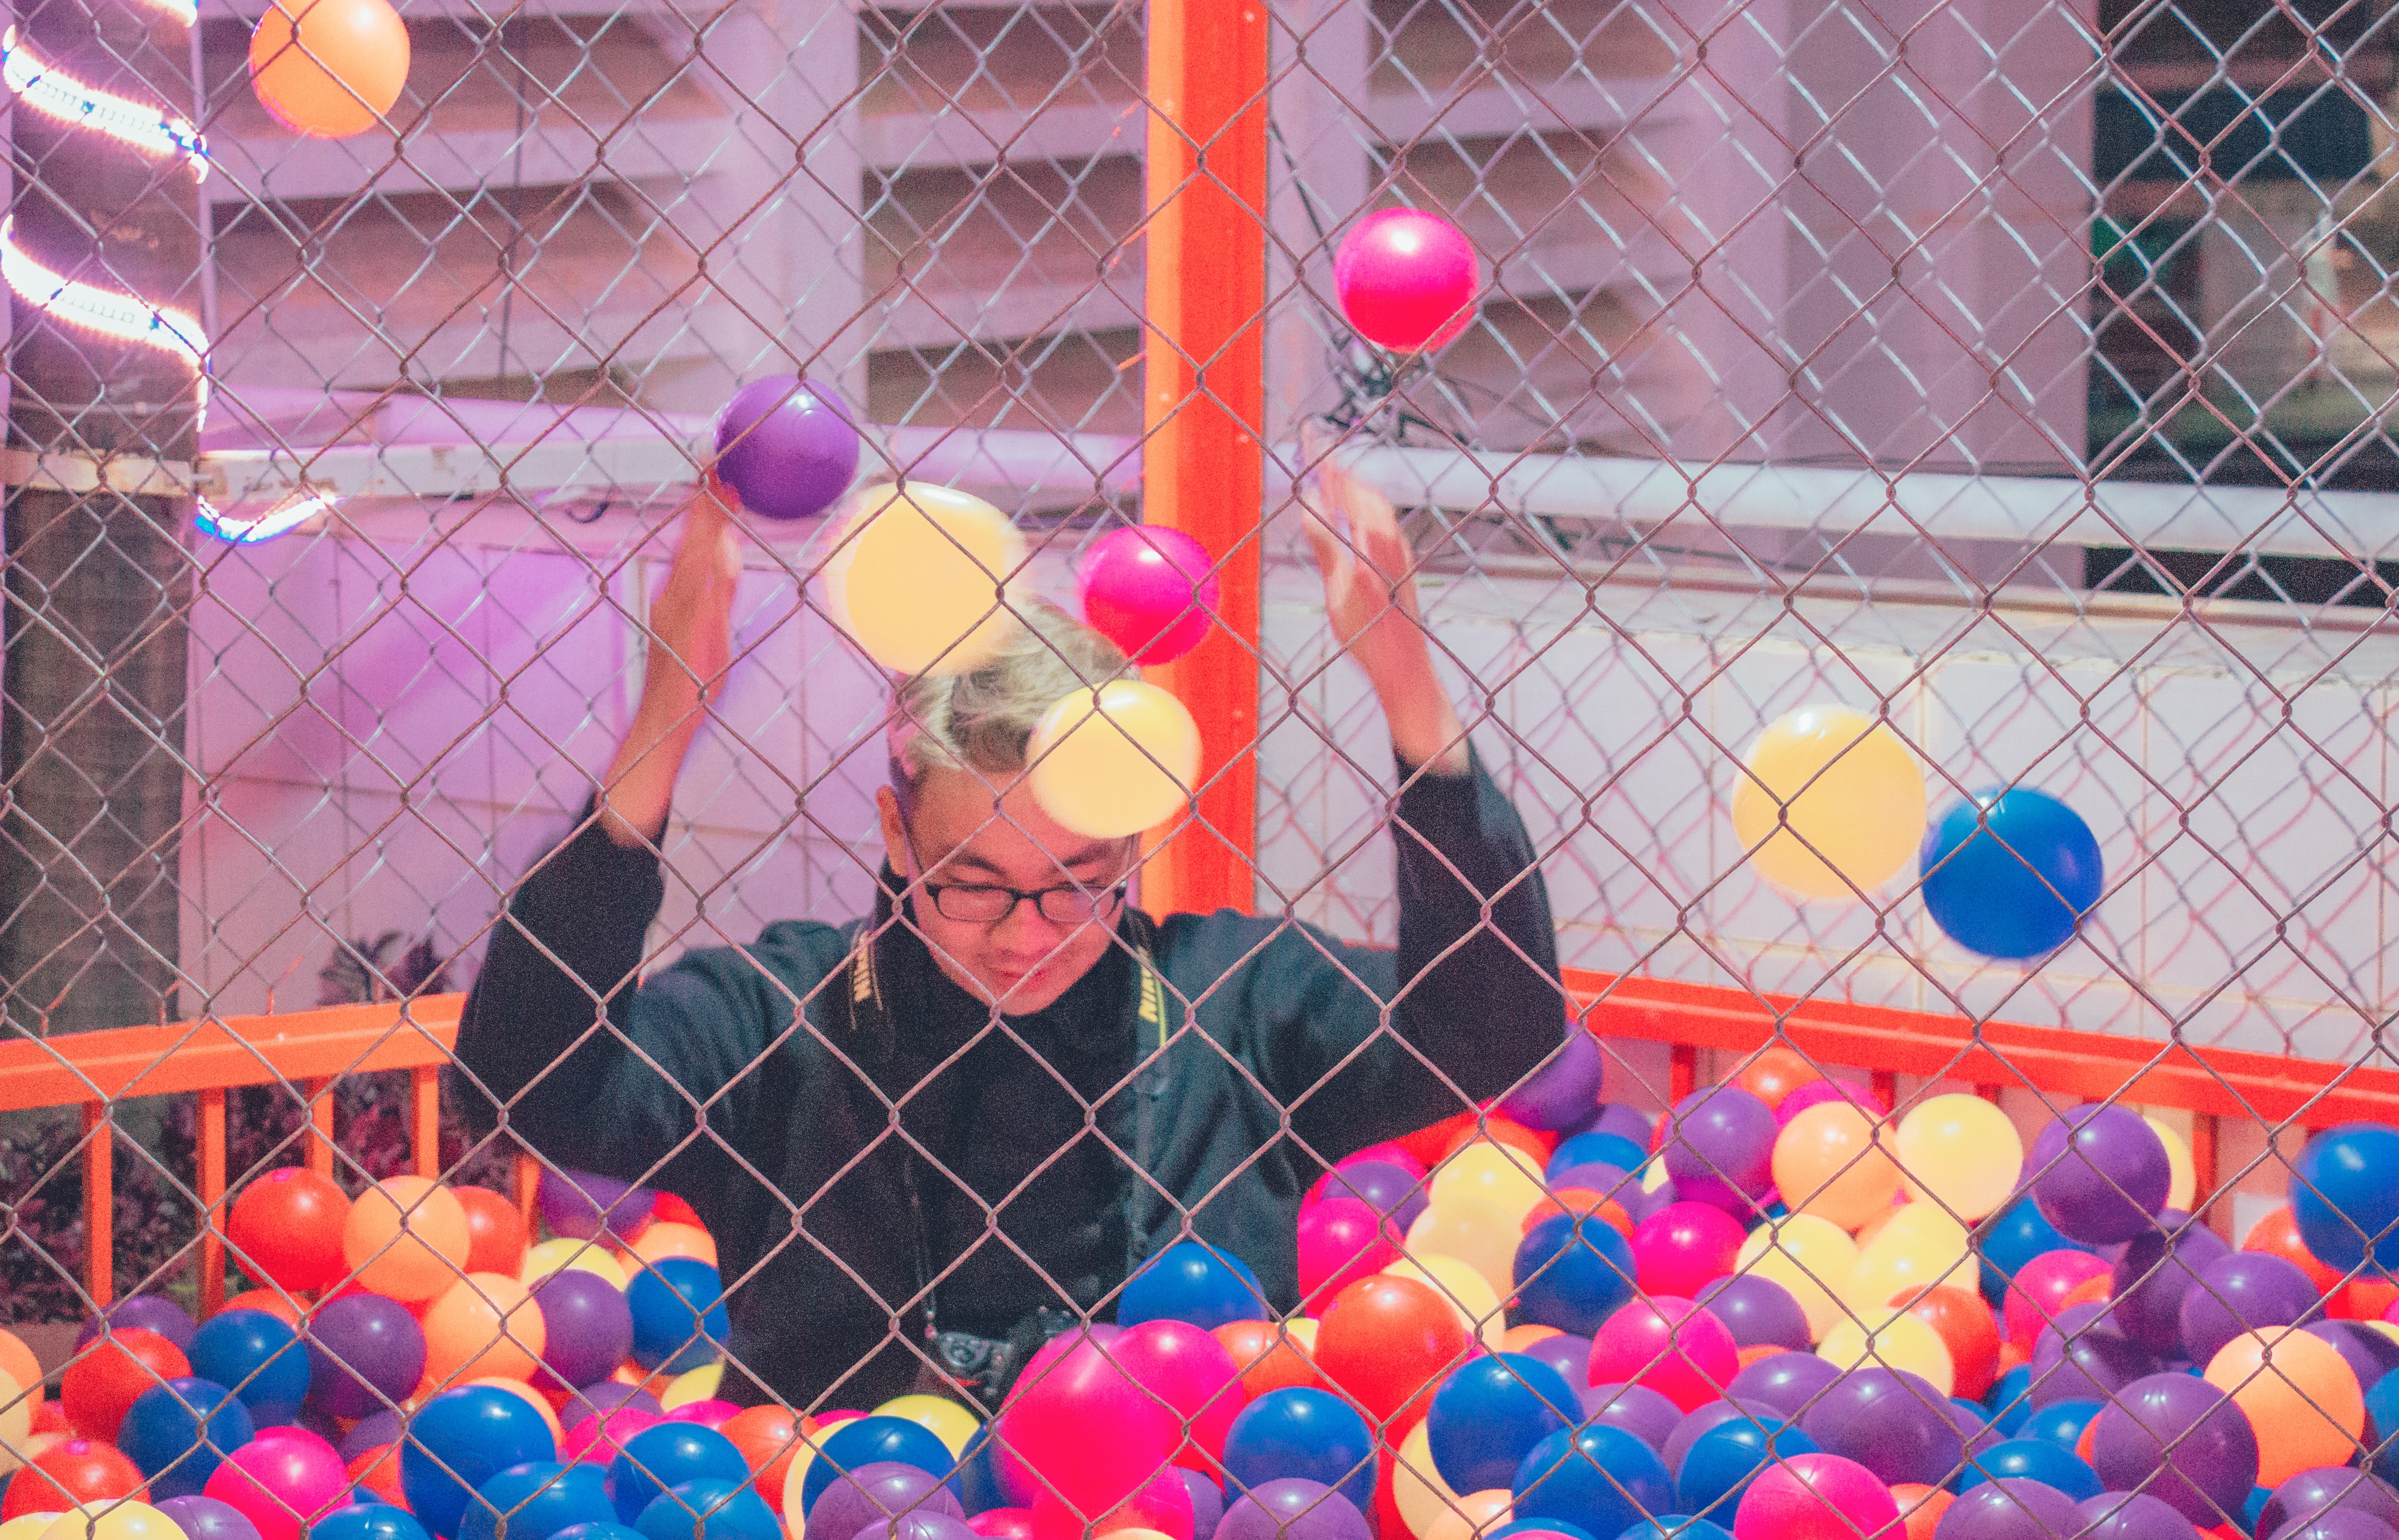 Man in ball pit photo